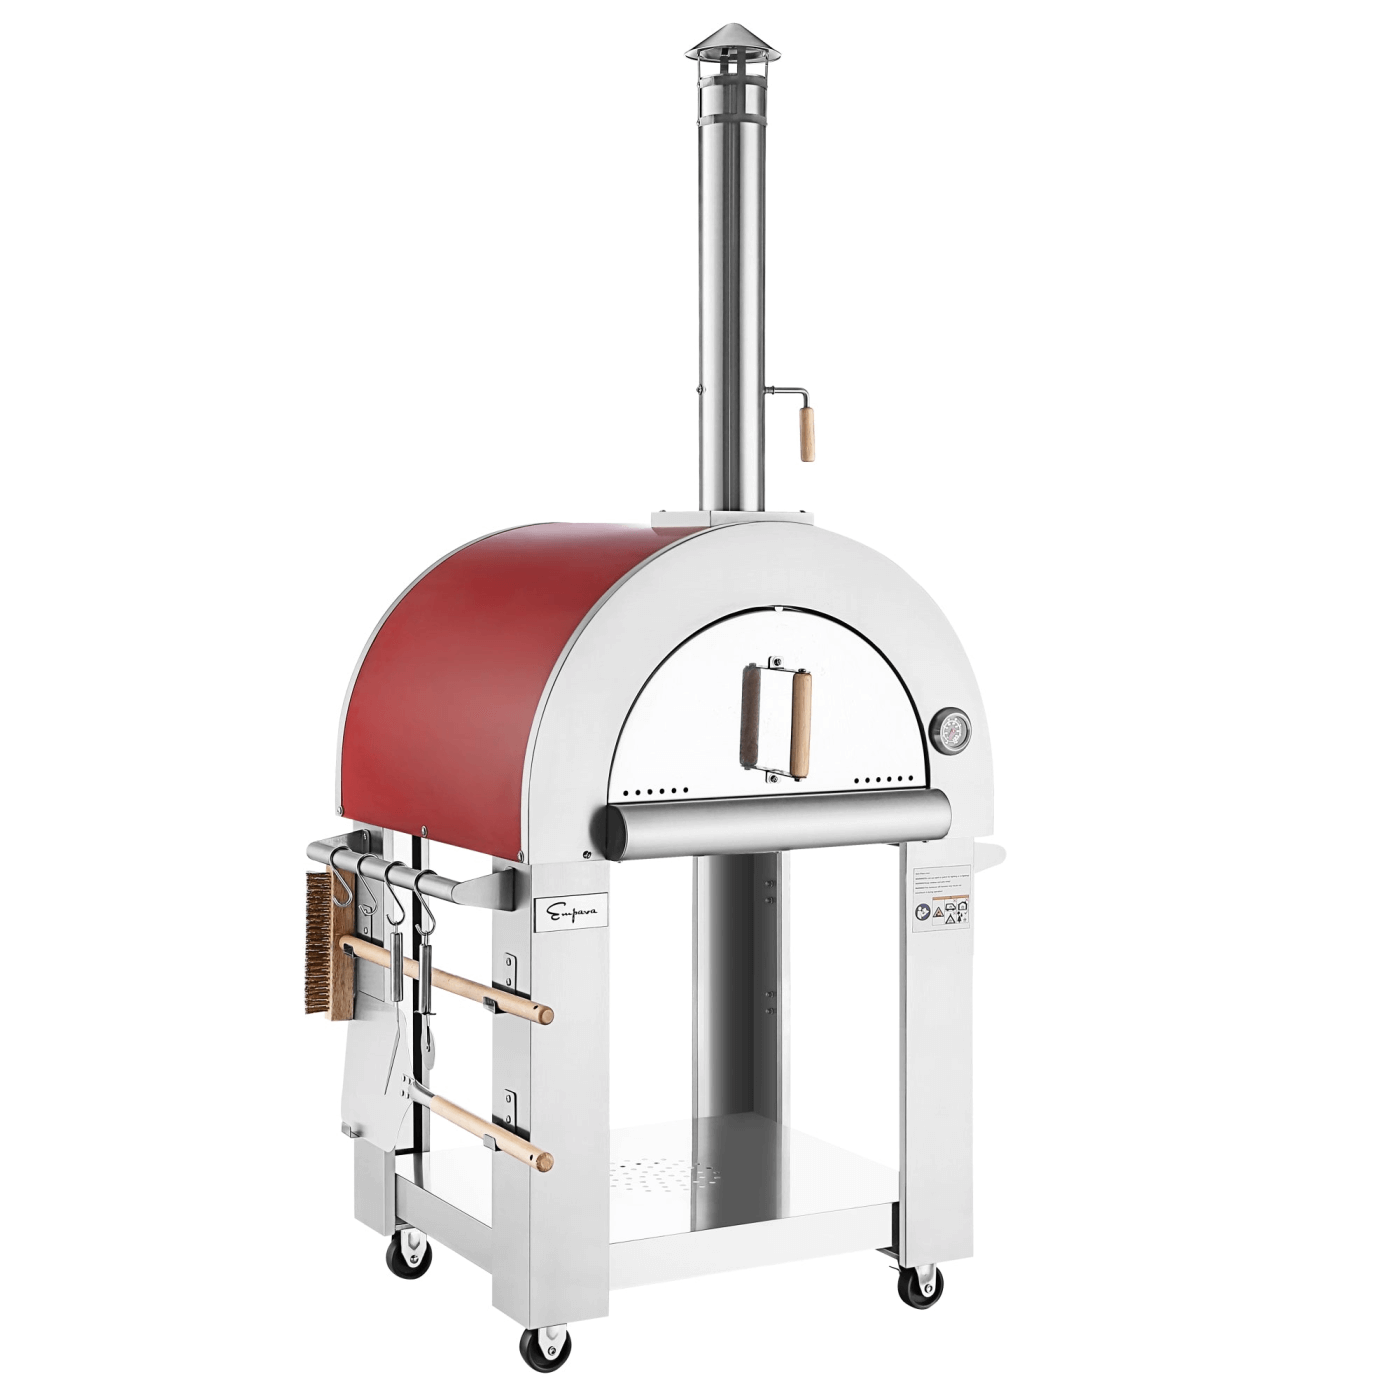 Empava Outdoor Wood Fired Pizza Oven - white background